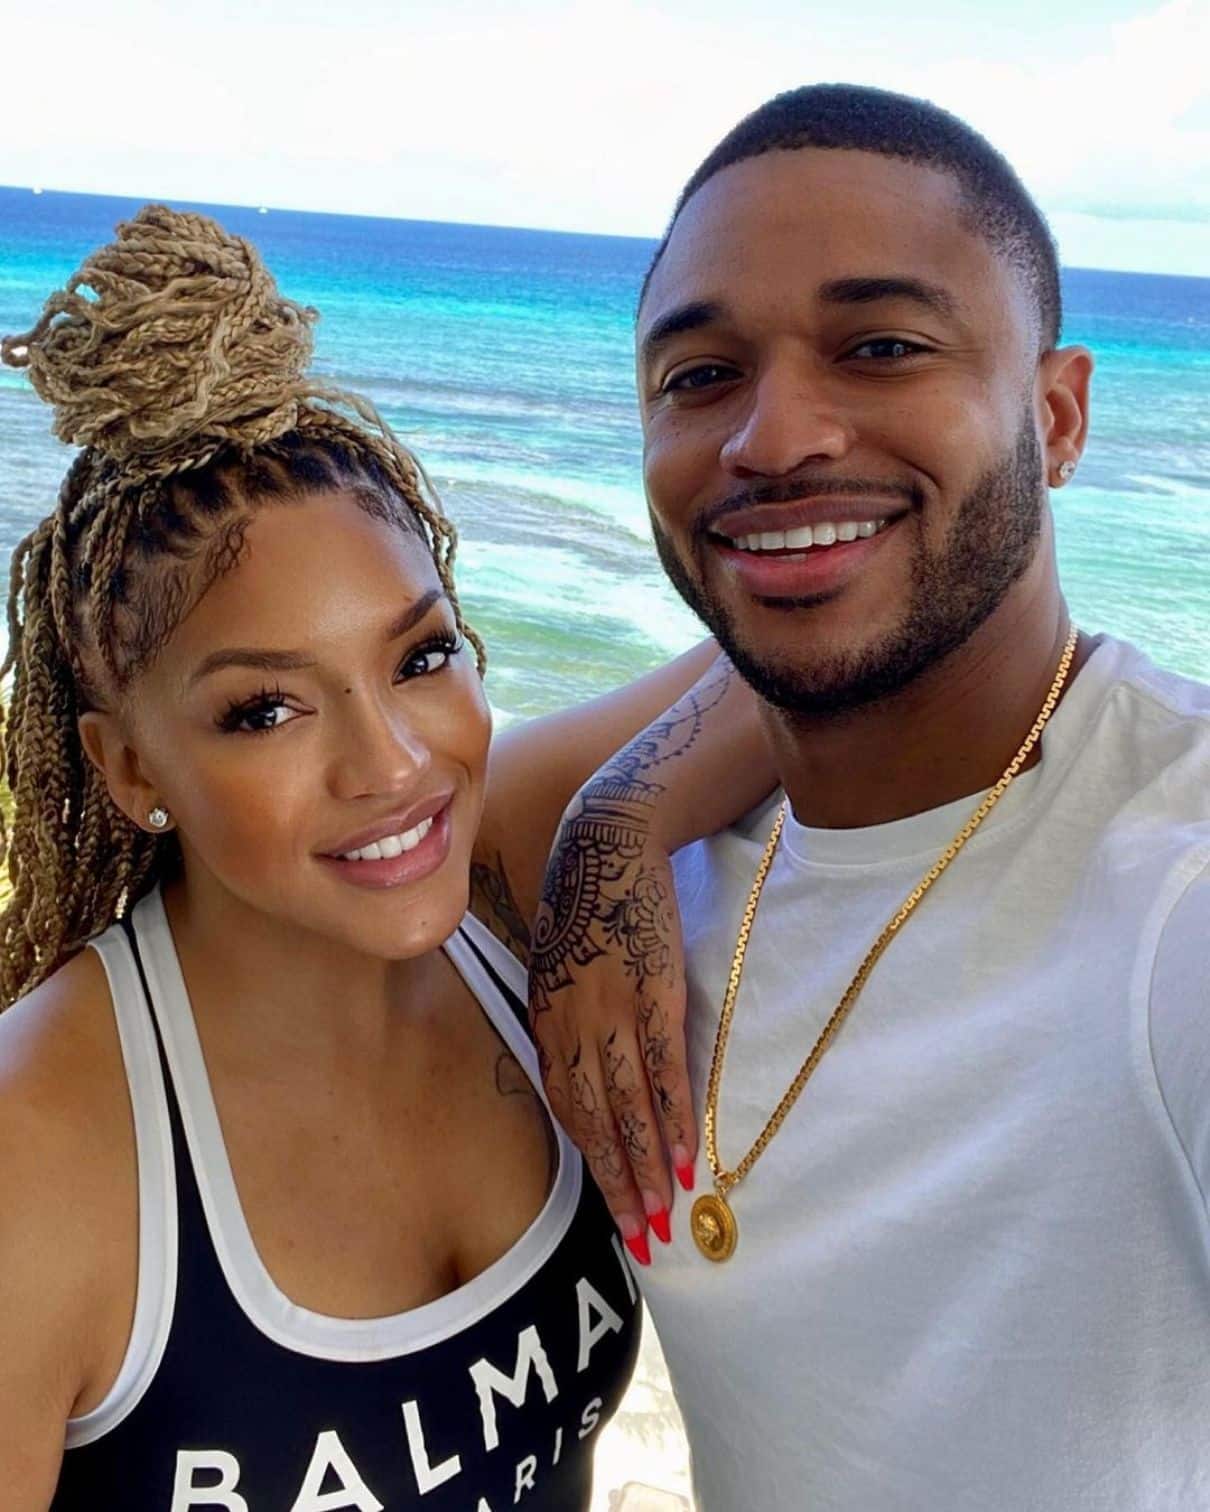 RHOA’s Drew Sidora Offers Update on Relationship With Husband Ralph After Texting Scandal, Plus Reveals Plastic Surgery She Had Done After Being "Body-Shamed"